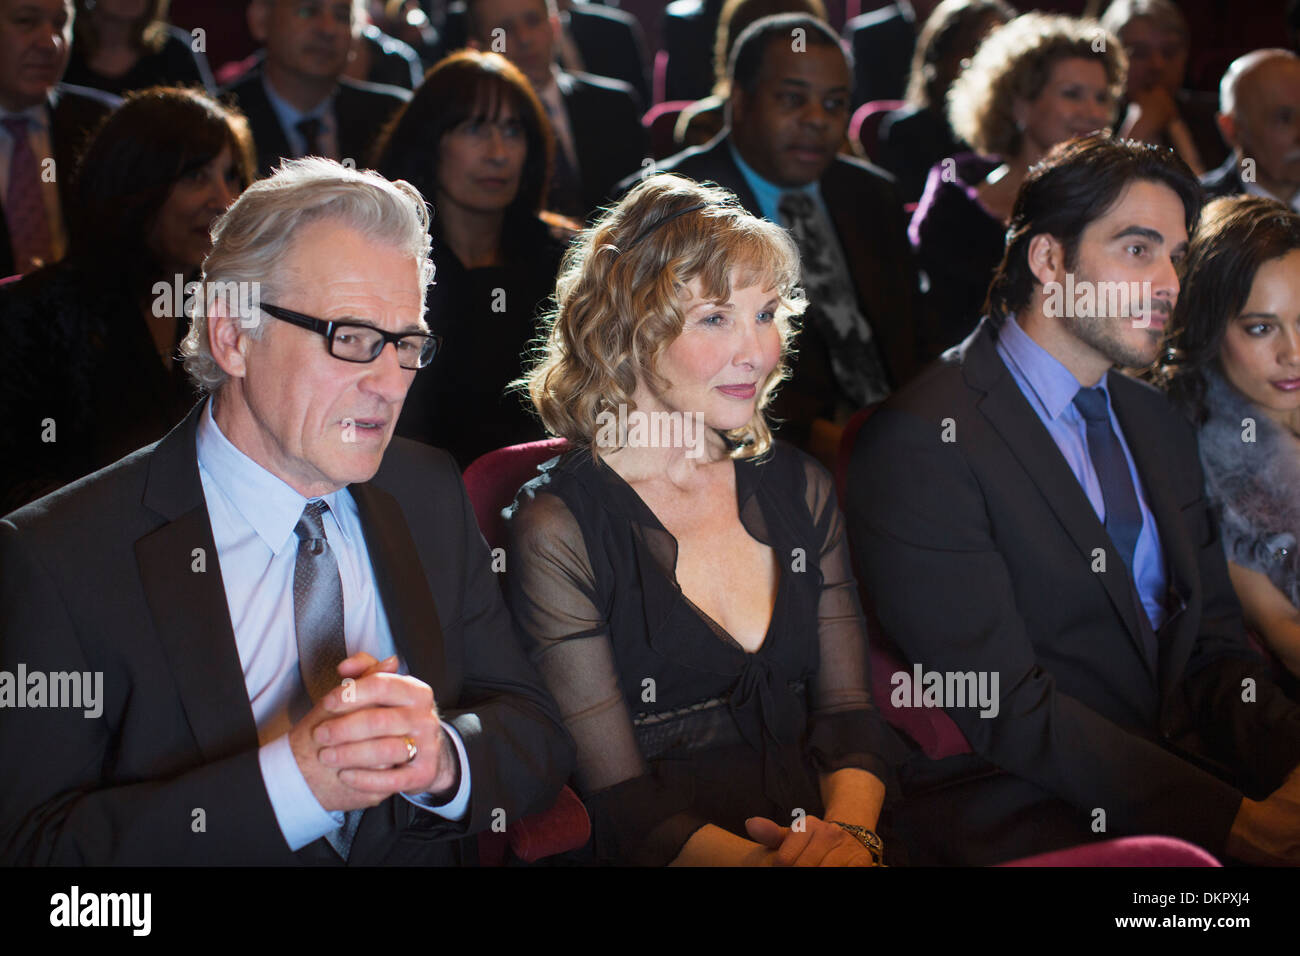 Attentive theater audience Stock Photo